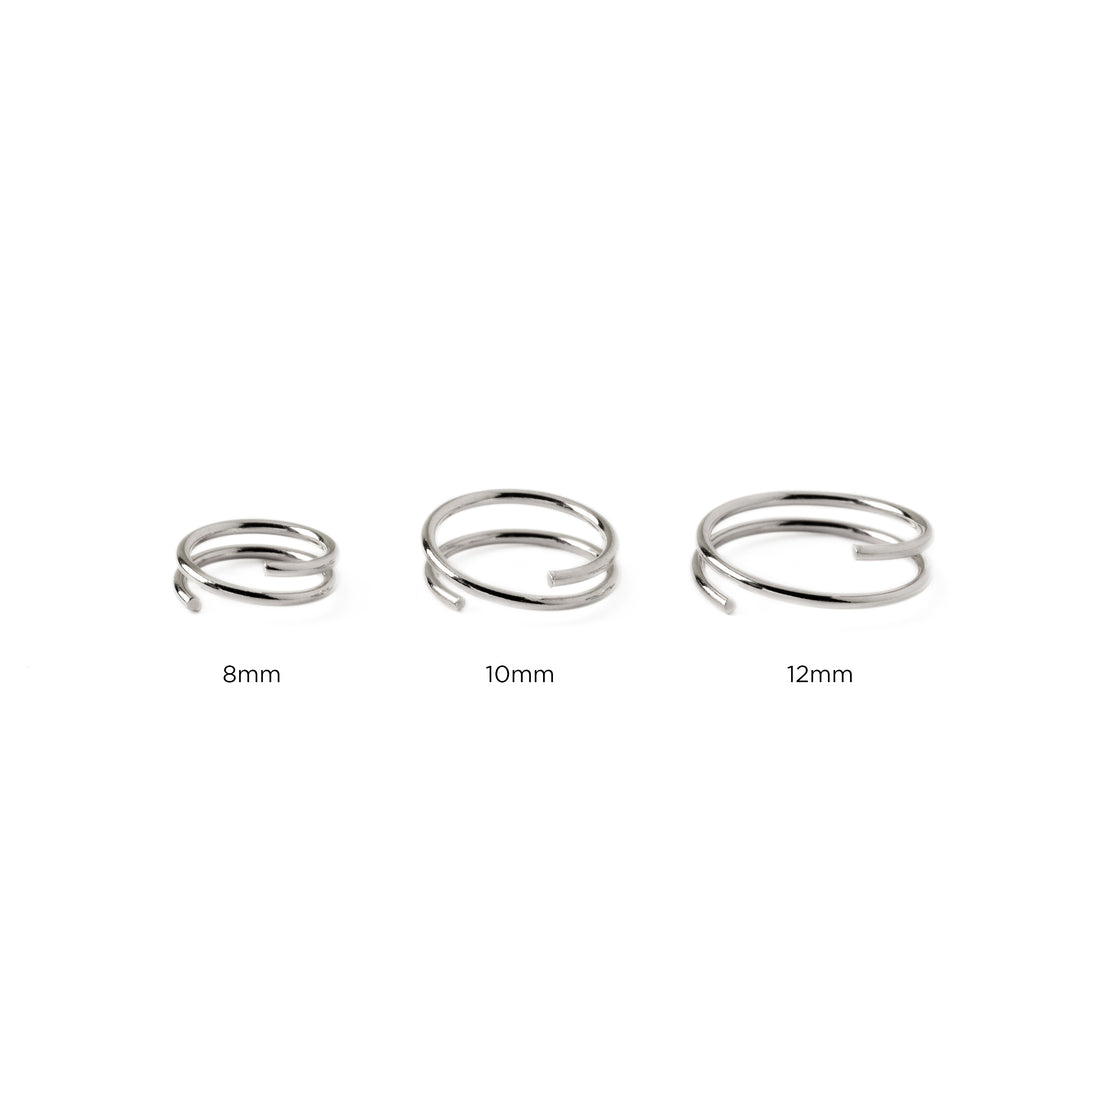 8mm, 10mm, 12mm Spiralling sterling silver double nose rings 